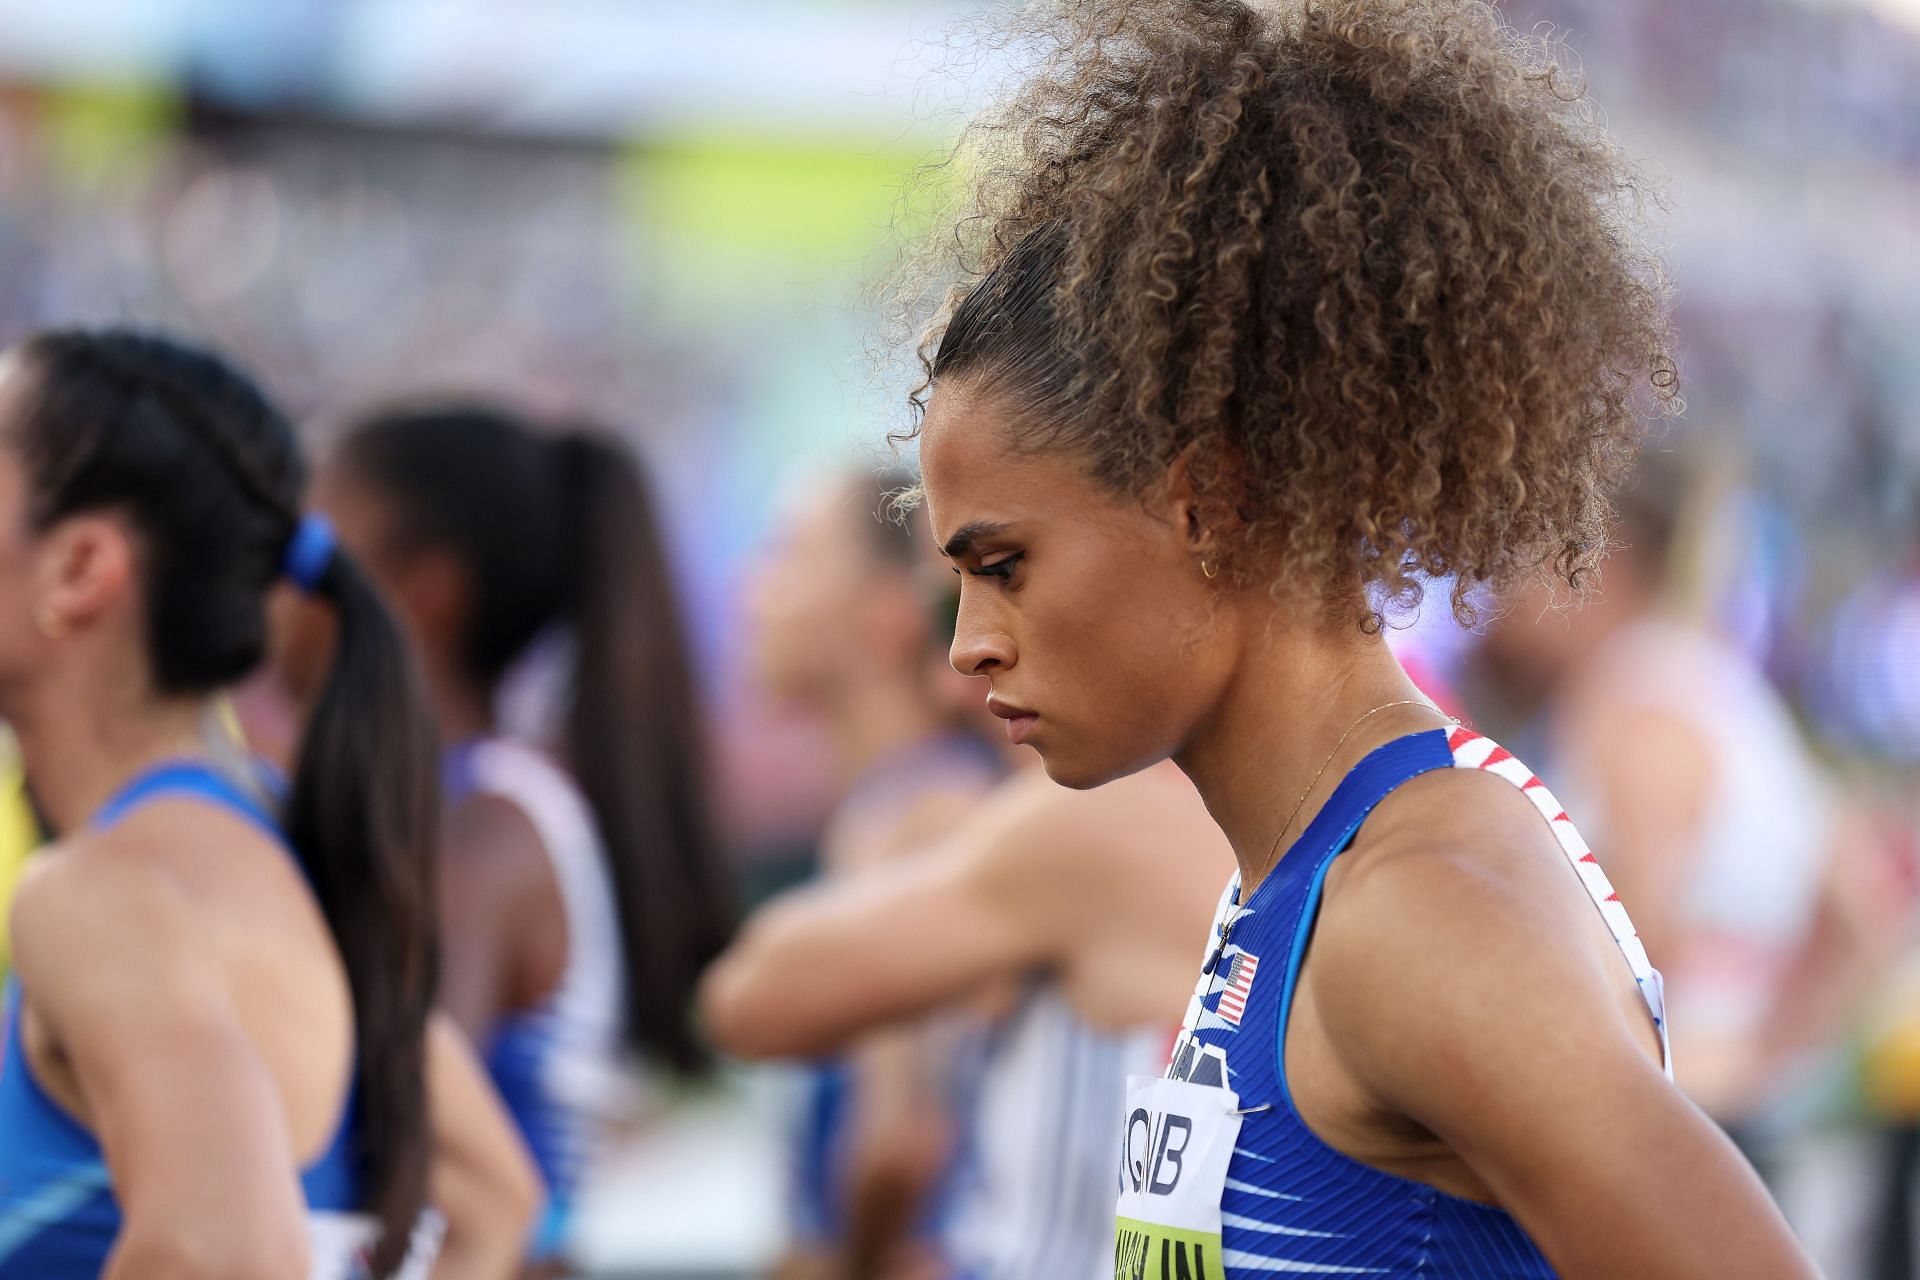 Sydney McLaughlin competes in the Women&#039;s 4x400m Relay Final at the World Athletics Championships in Eugene, Oregon.